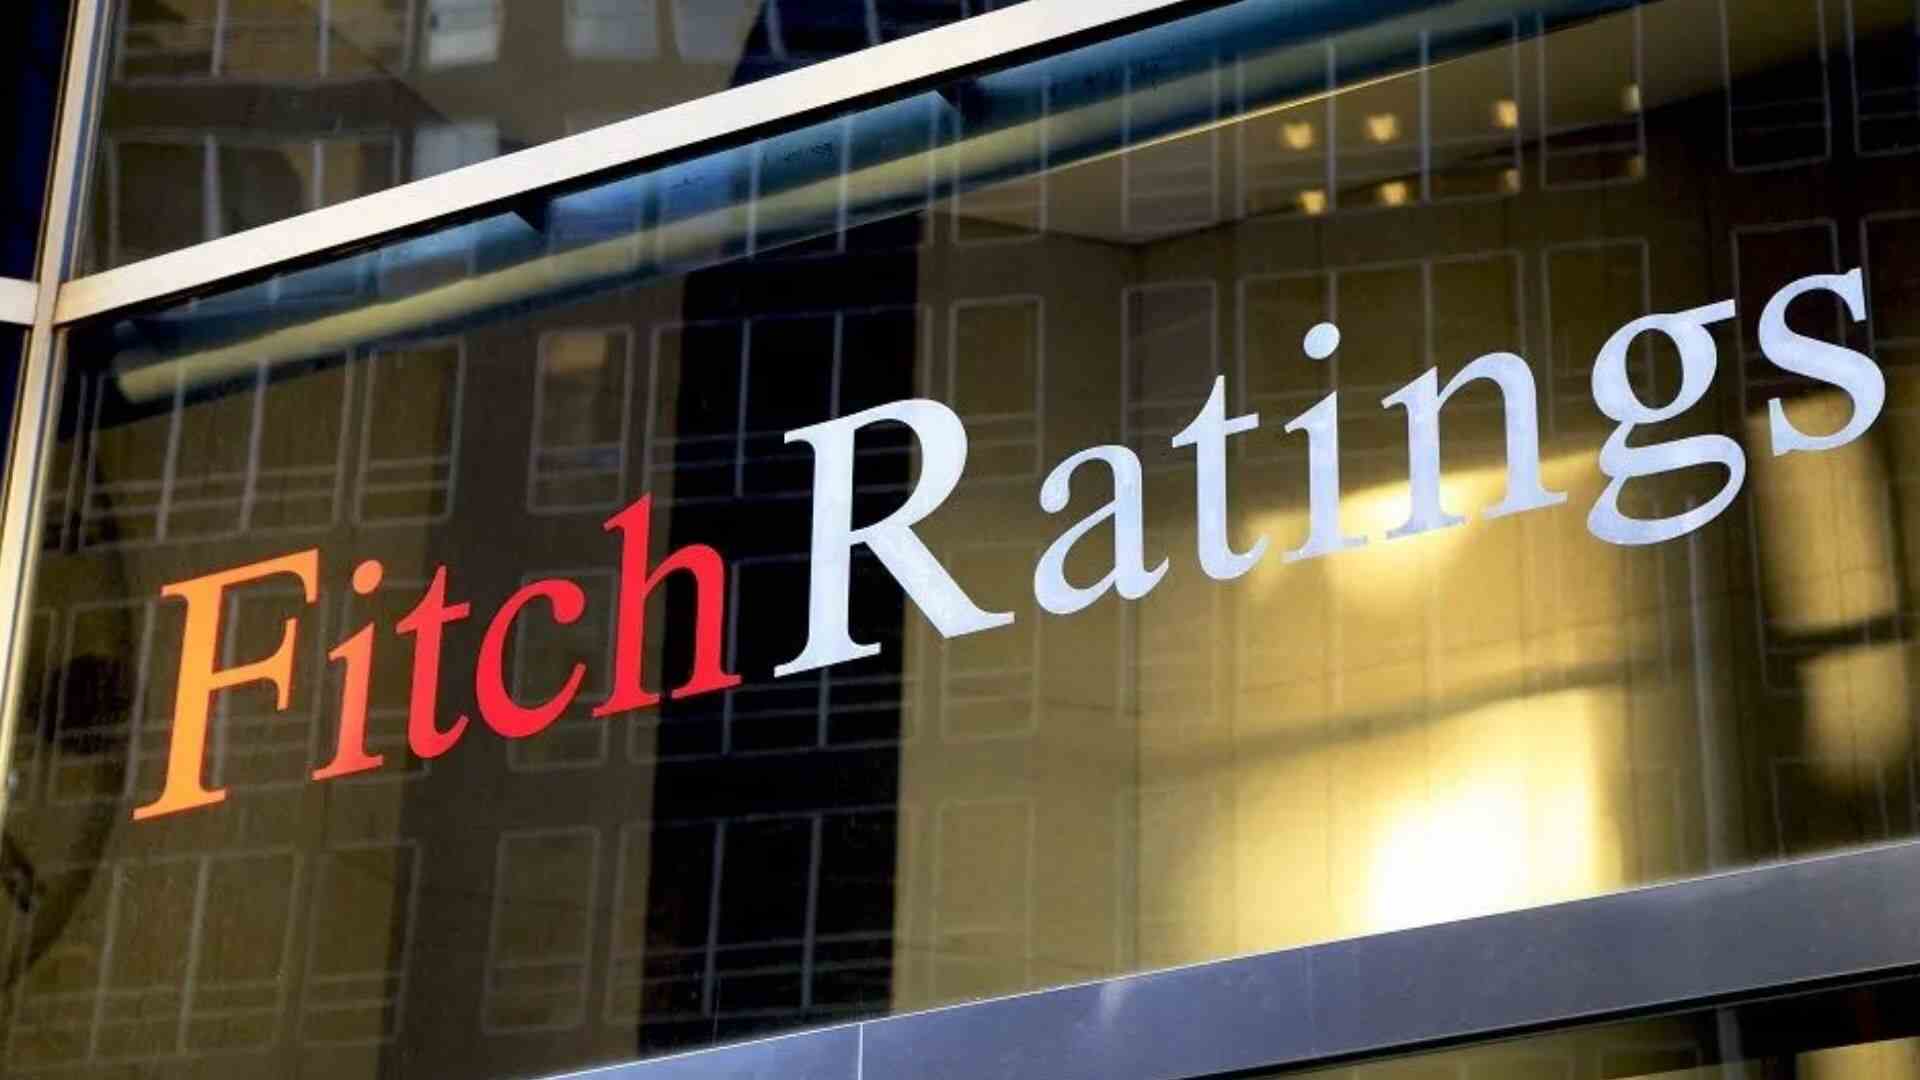 RBI’s Dividend Of Rs 2.11 Lakh Supports Fiscal Performance In The Near Term: Fitch Ratings